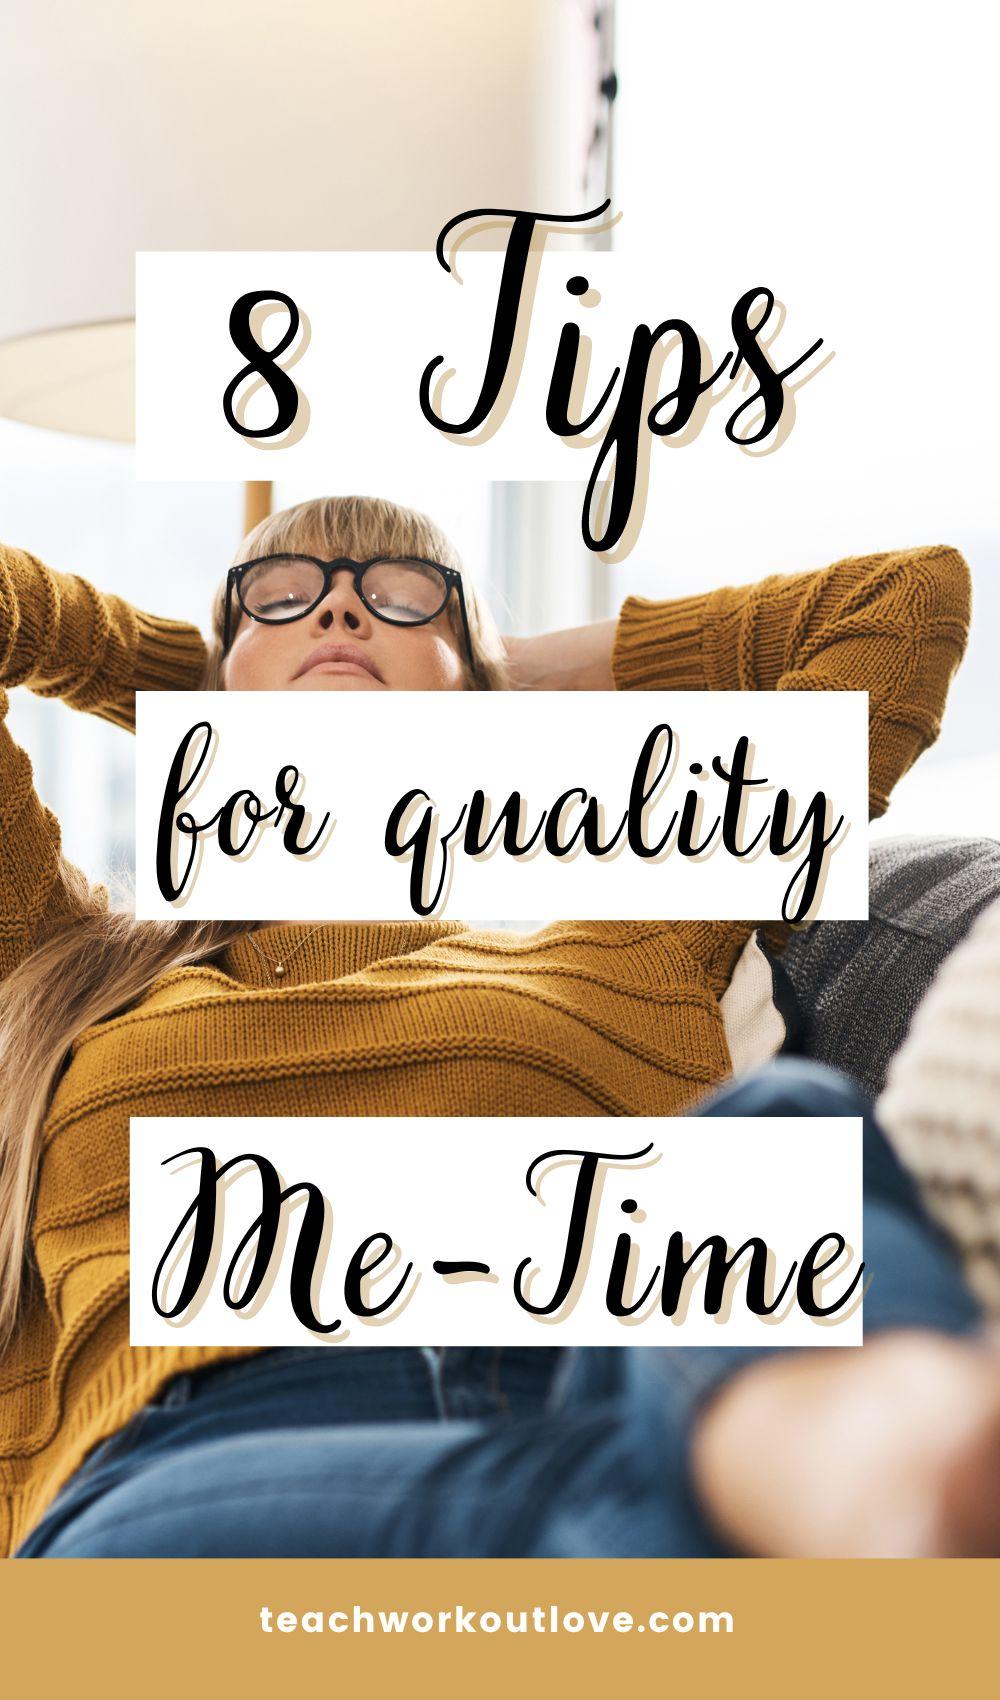 Getting quality me-time can be difficult for busy moms. There’s so much to do in a day, from work to household chores to childcare. But taking care of yourself is so important and should not be left on the back burner. You might need help from others, whether for extra childcare to give yourself some time off or someone to talk through the daily stressors of busy family life. 